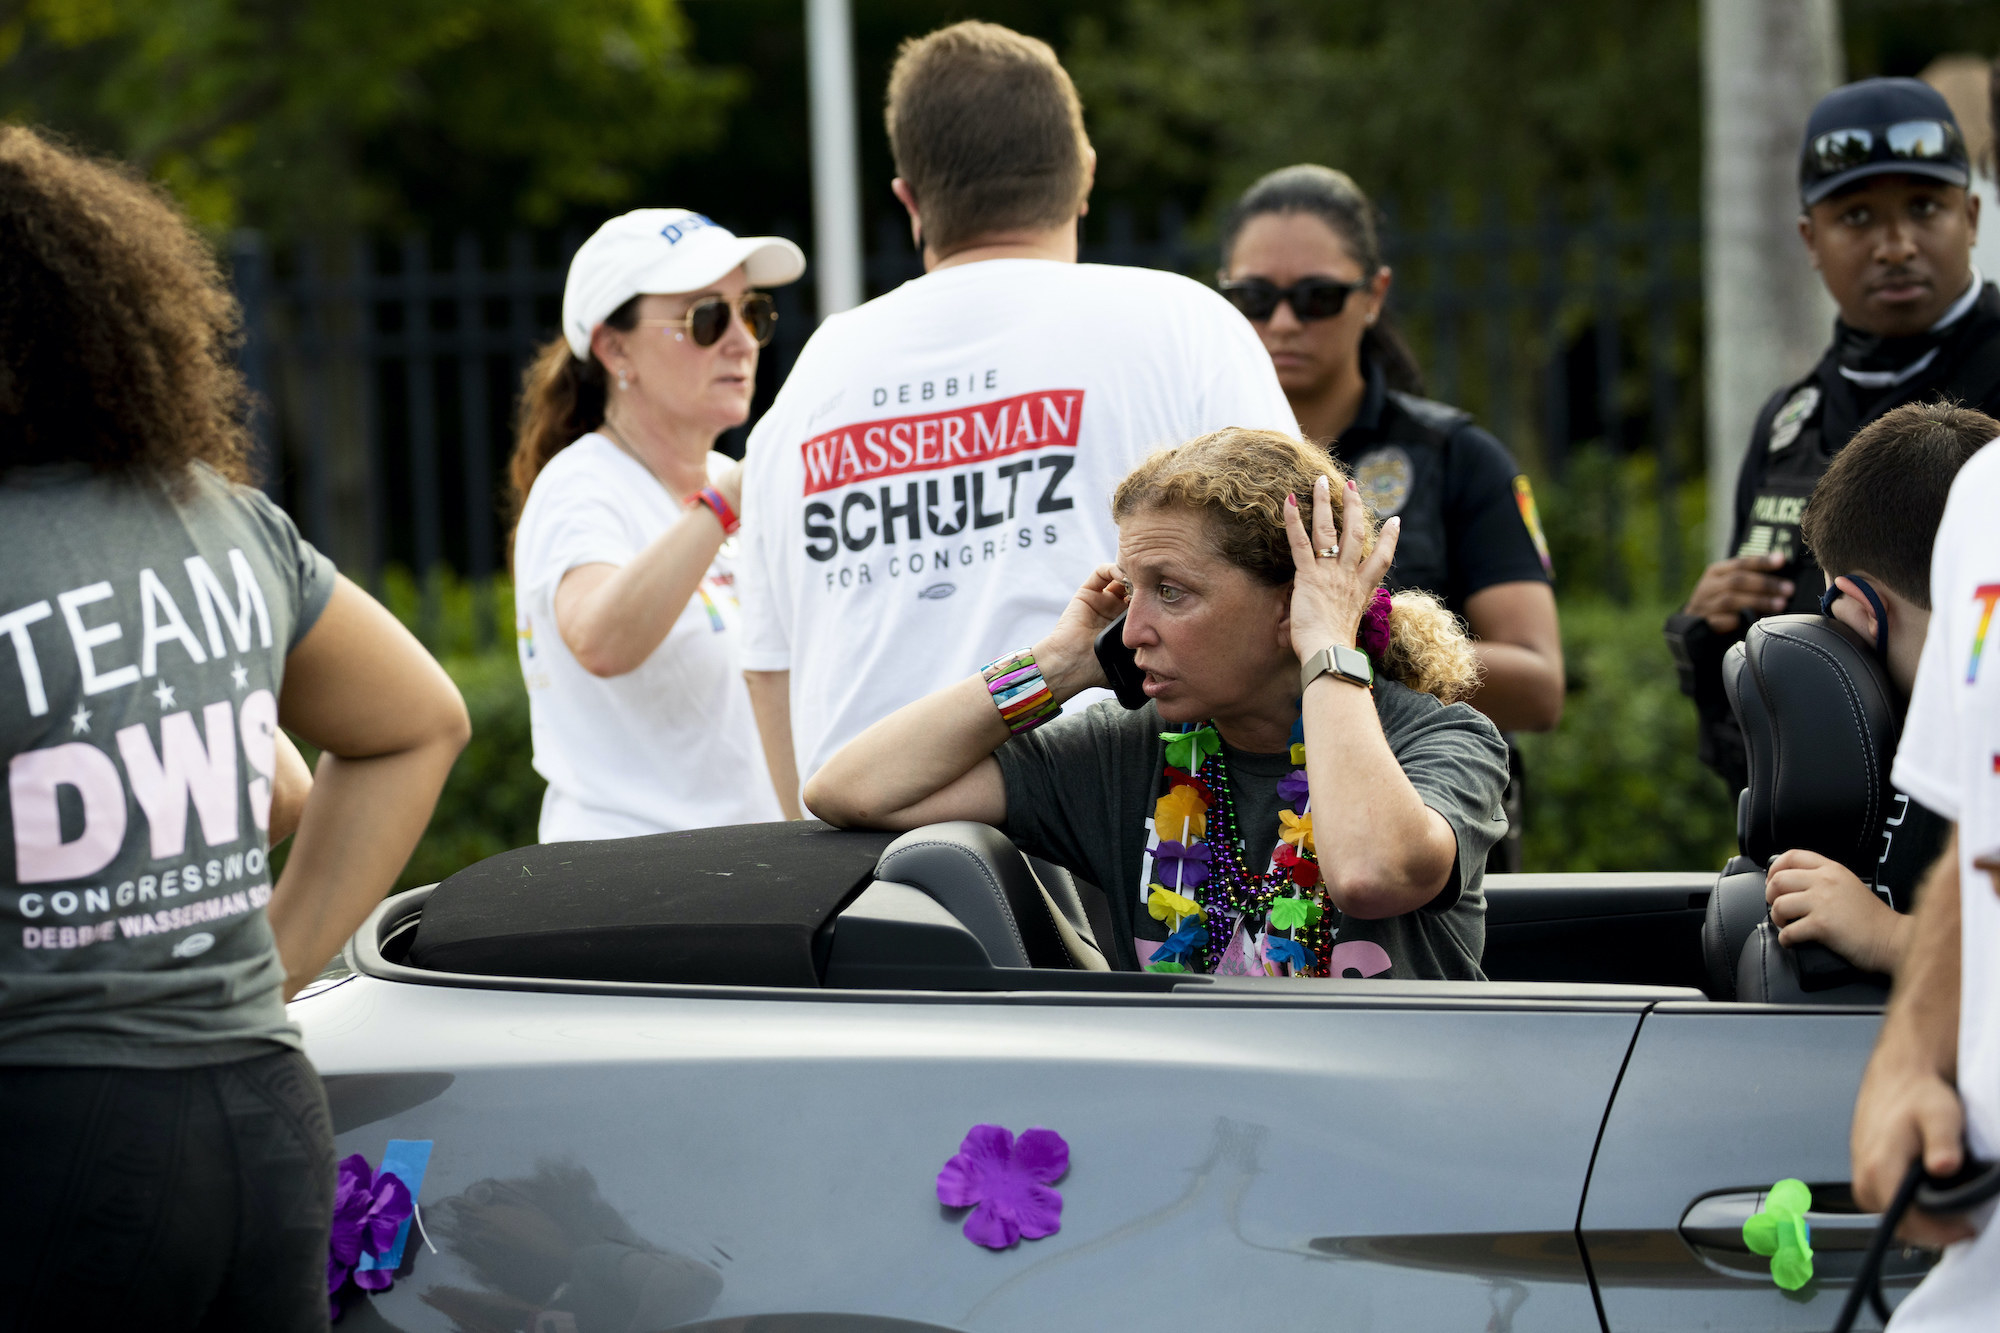 Debbie Wasserman Schultz is on the phone in the back of a convertible looking panicked